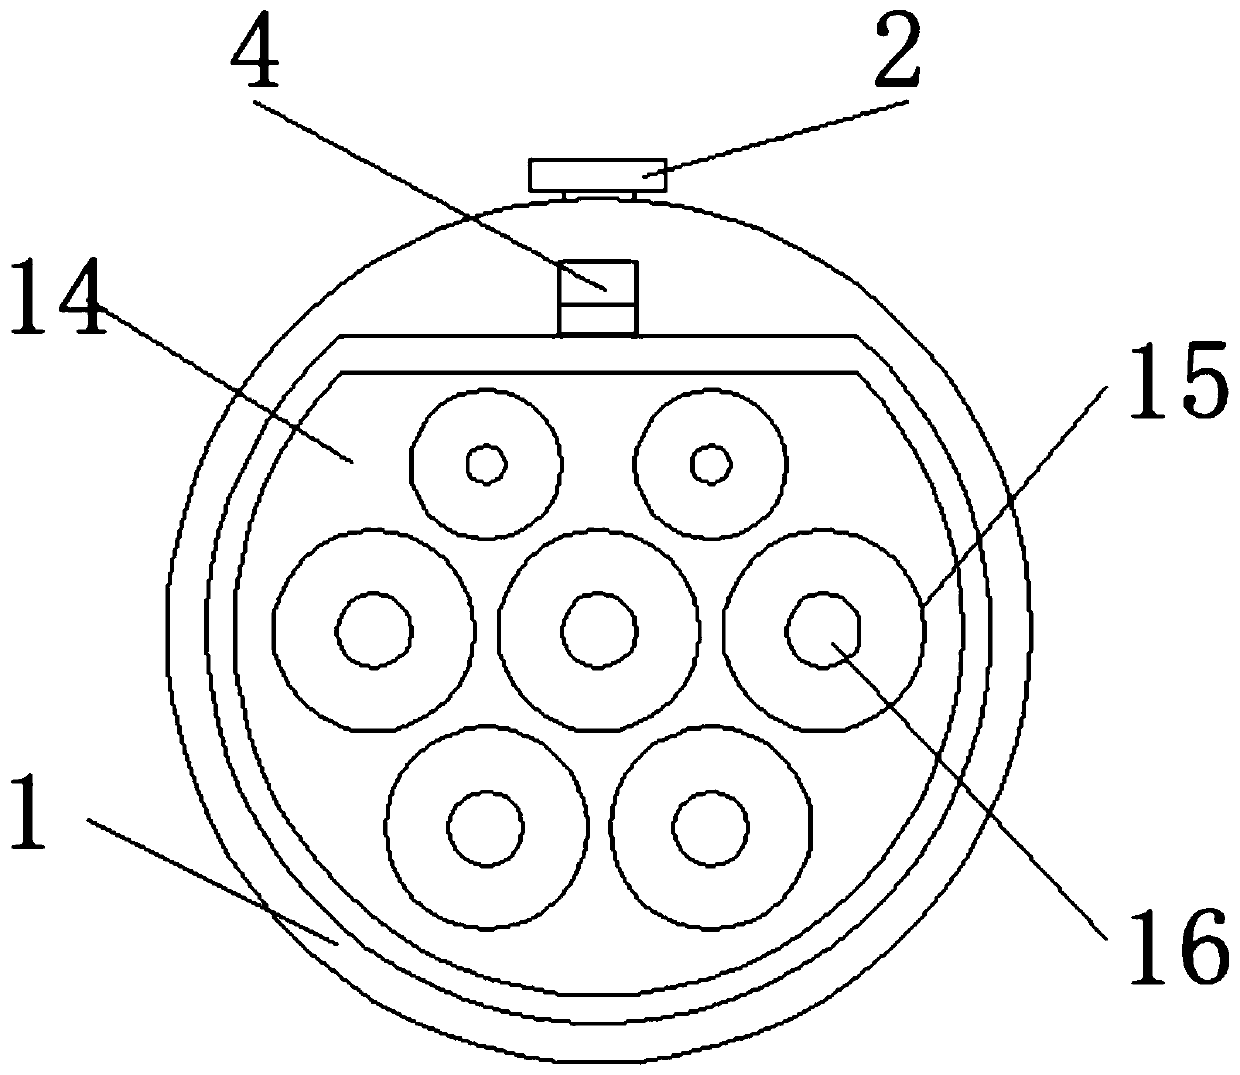 Charging port structure of electric automobile